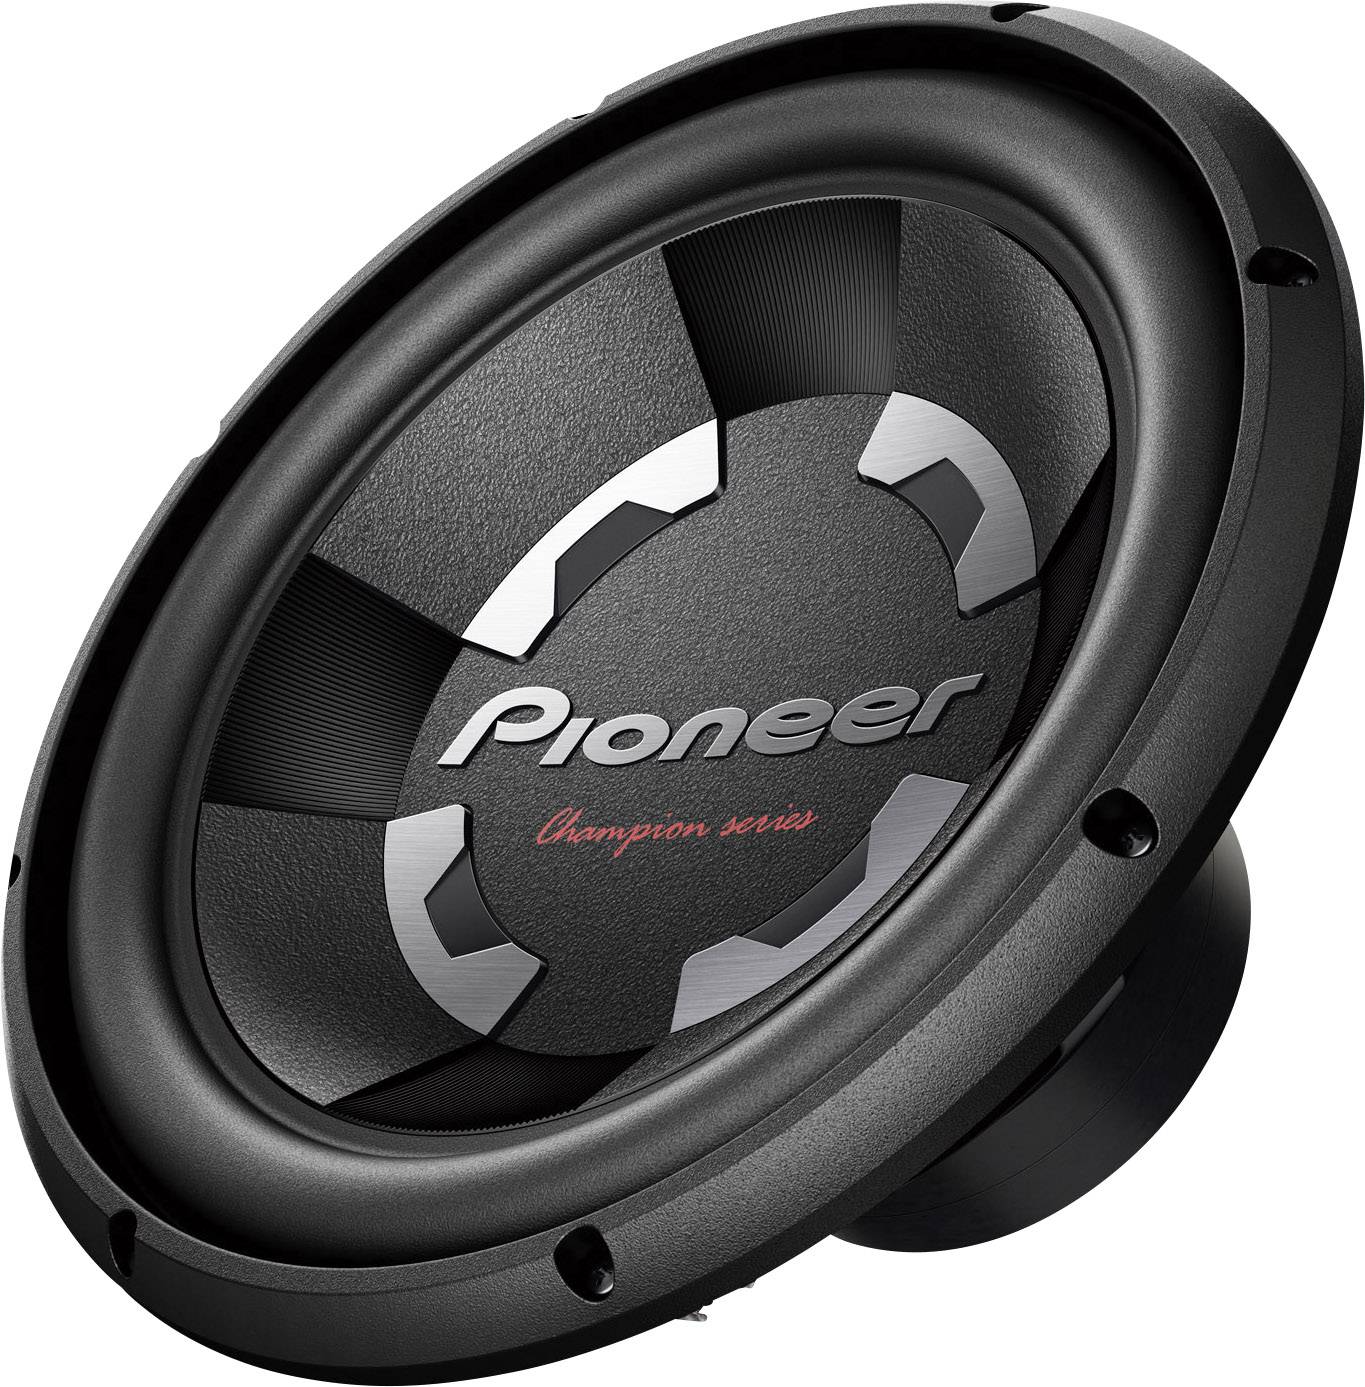 Pioneer TS-300S4 Auto-subwoofer-chassis 30 cm W 4 Ω